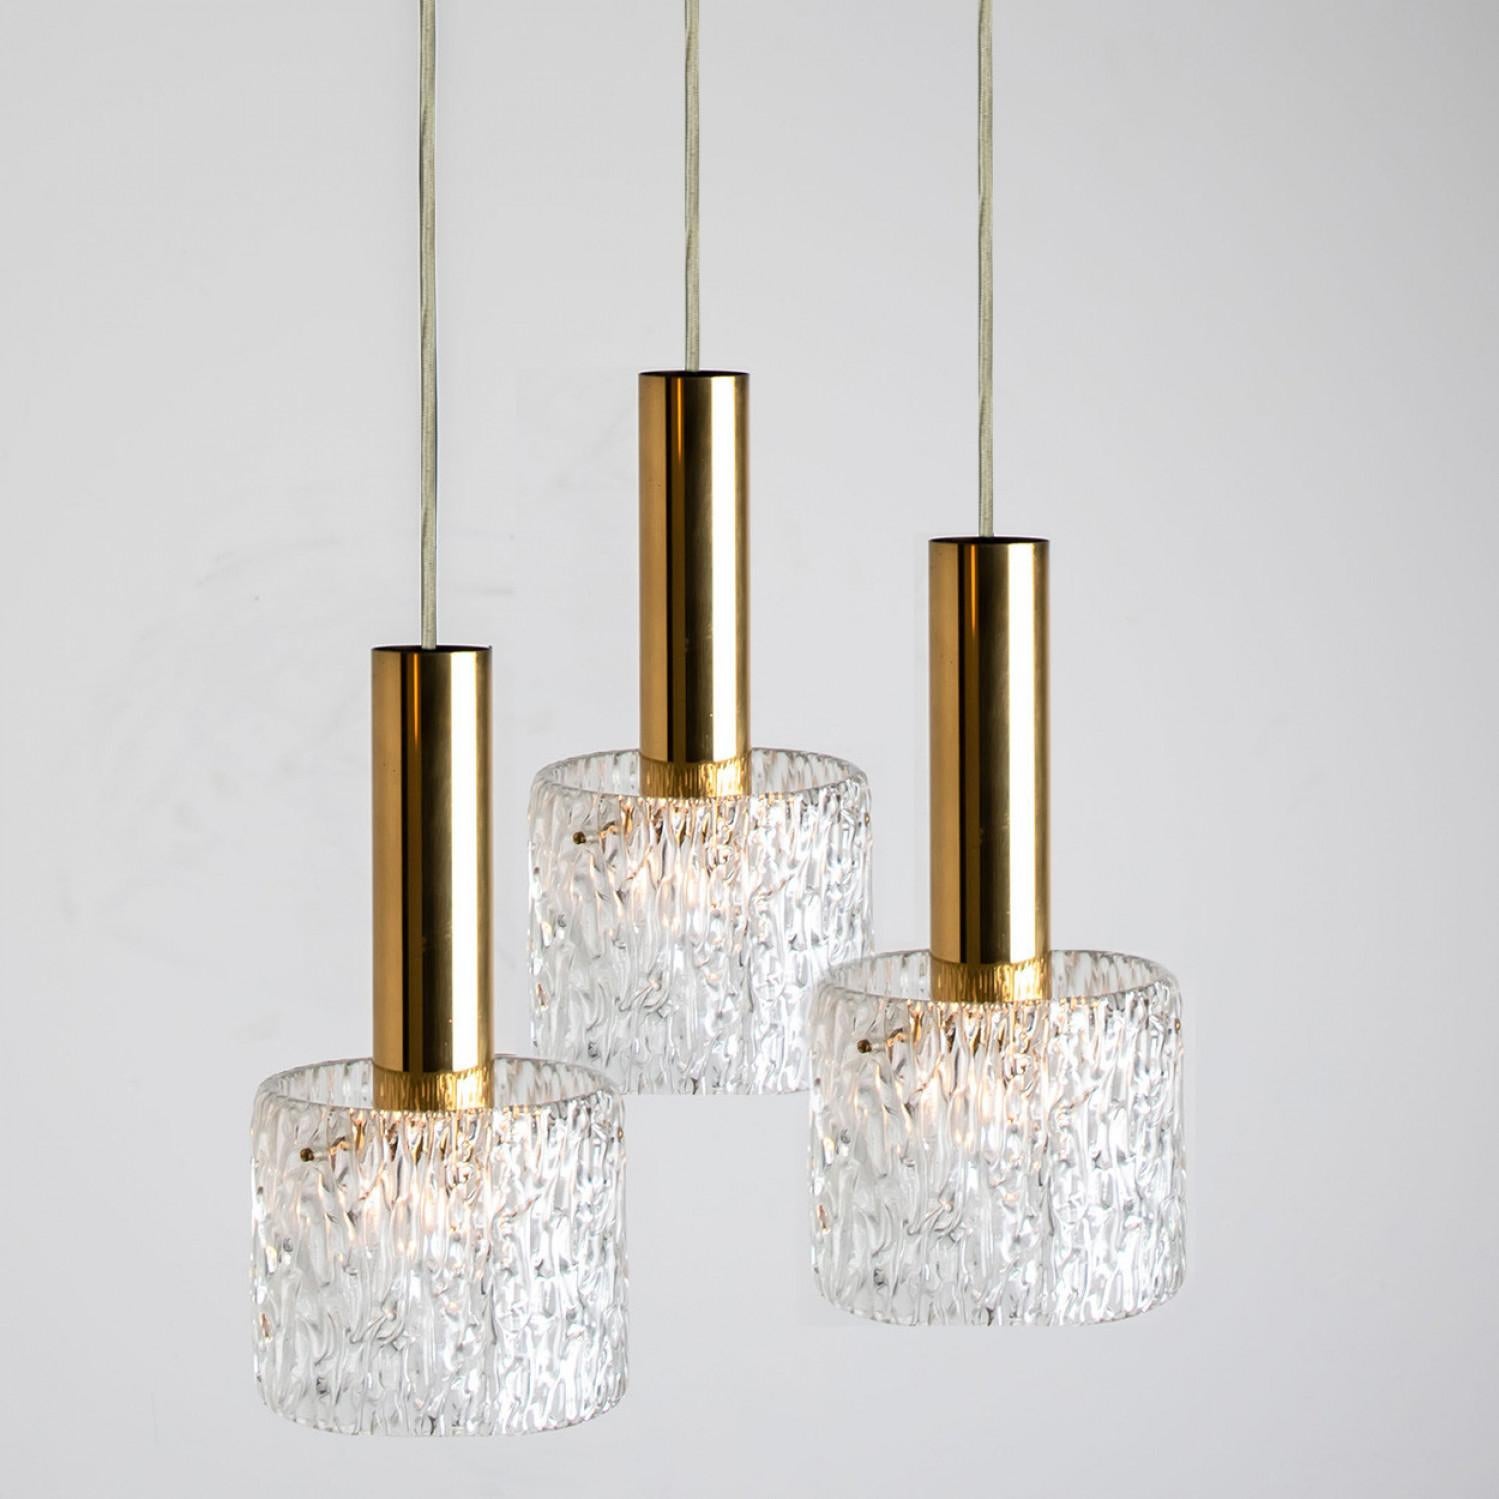 One of Three Wave Glass Pendant Lights by J.T. Kalmar, 1960s For Sale 1